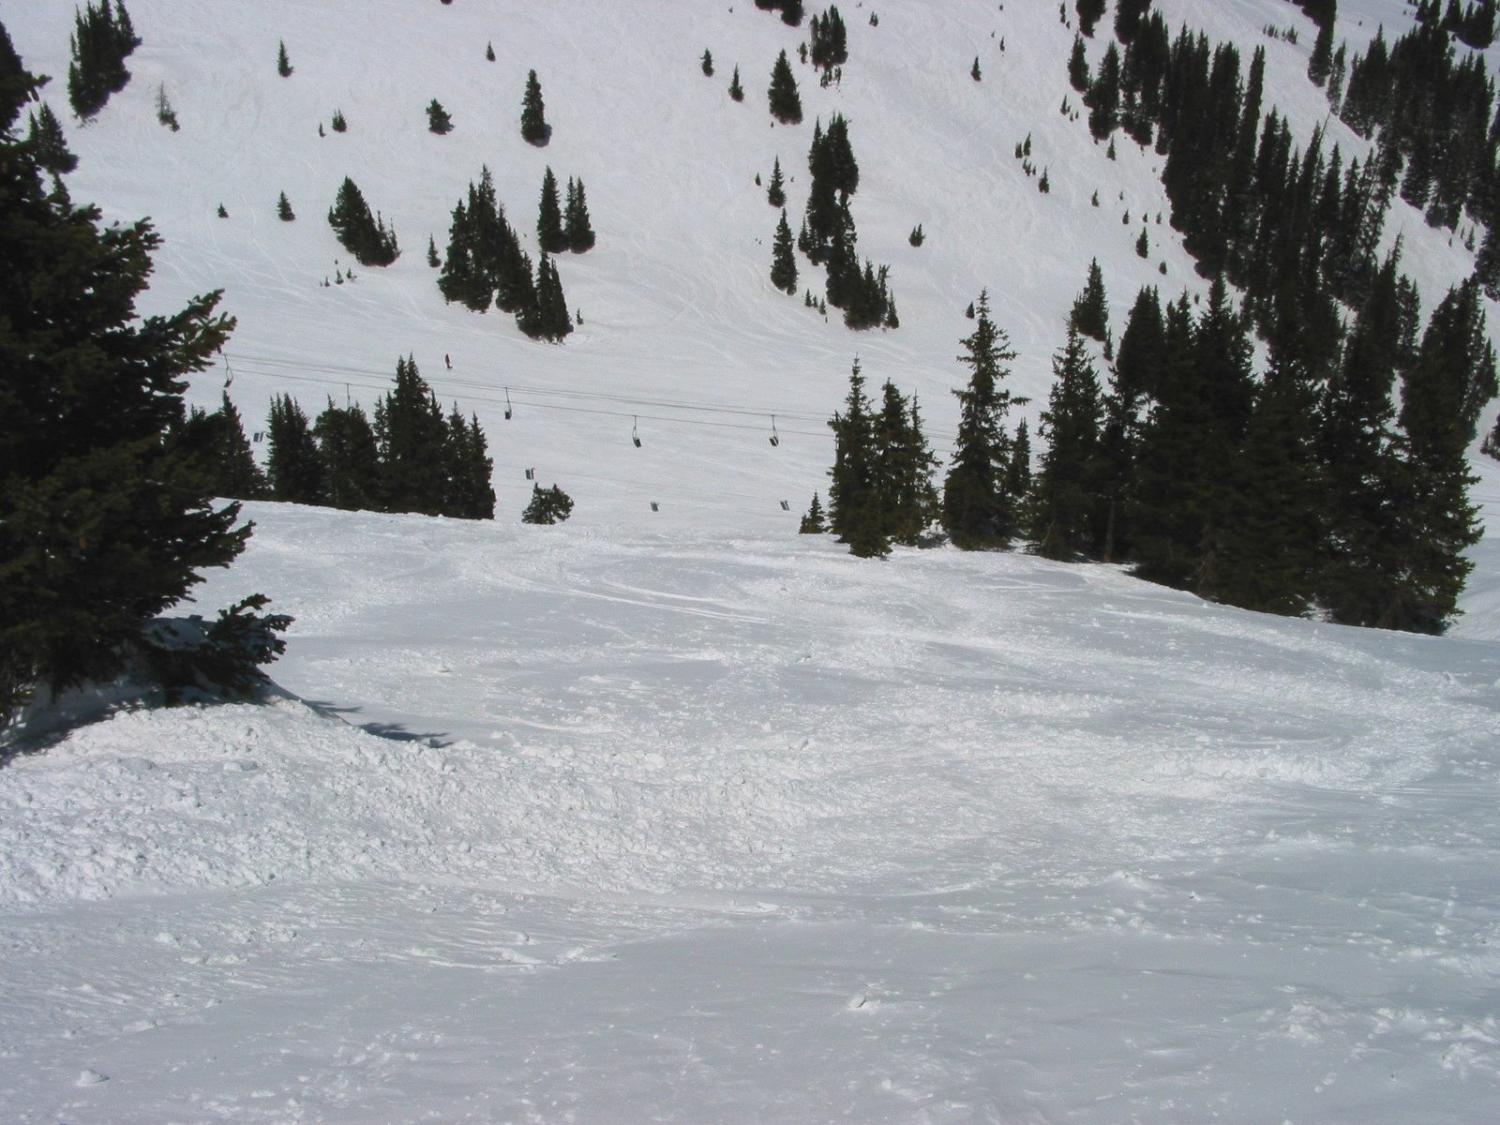 Center South Chutes with a light dusting of powder